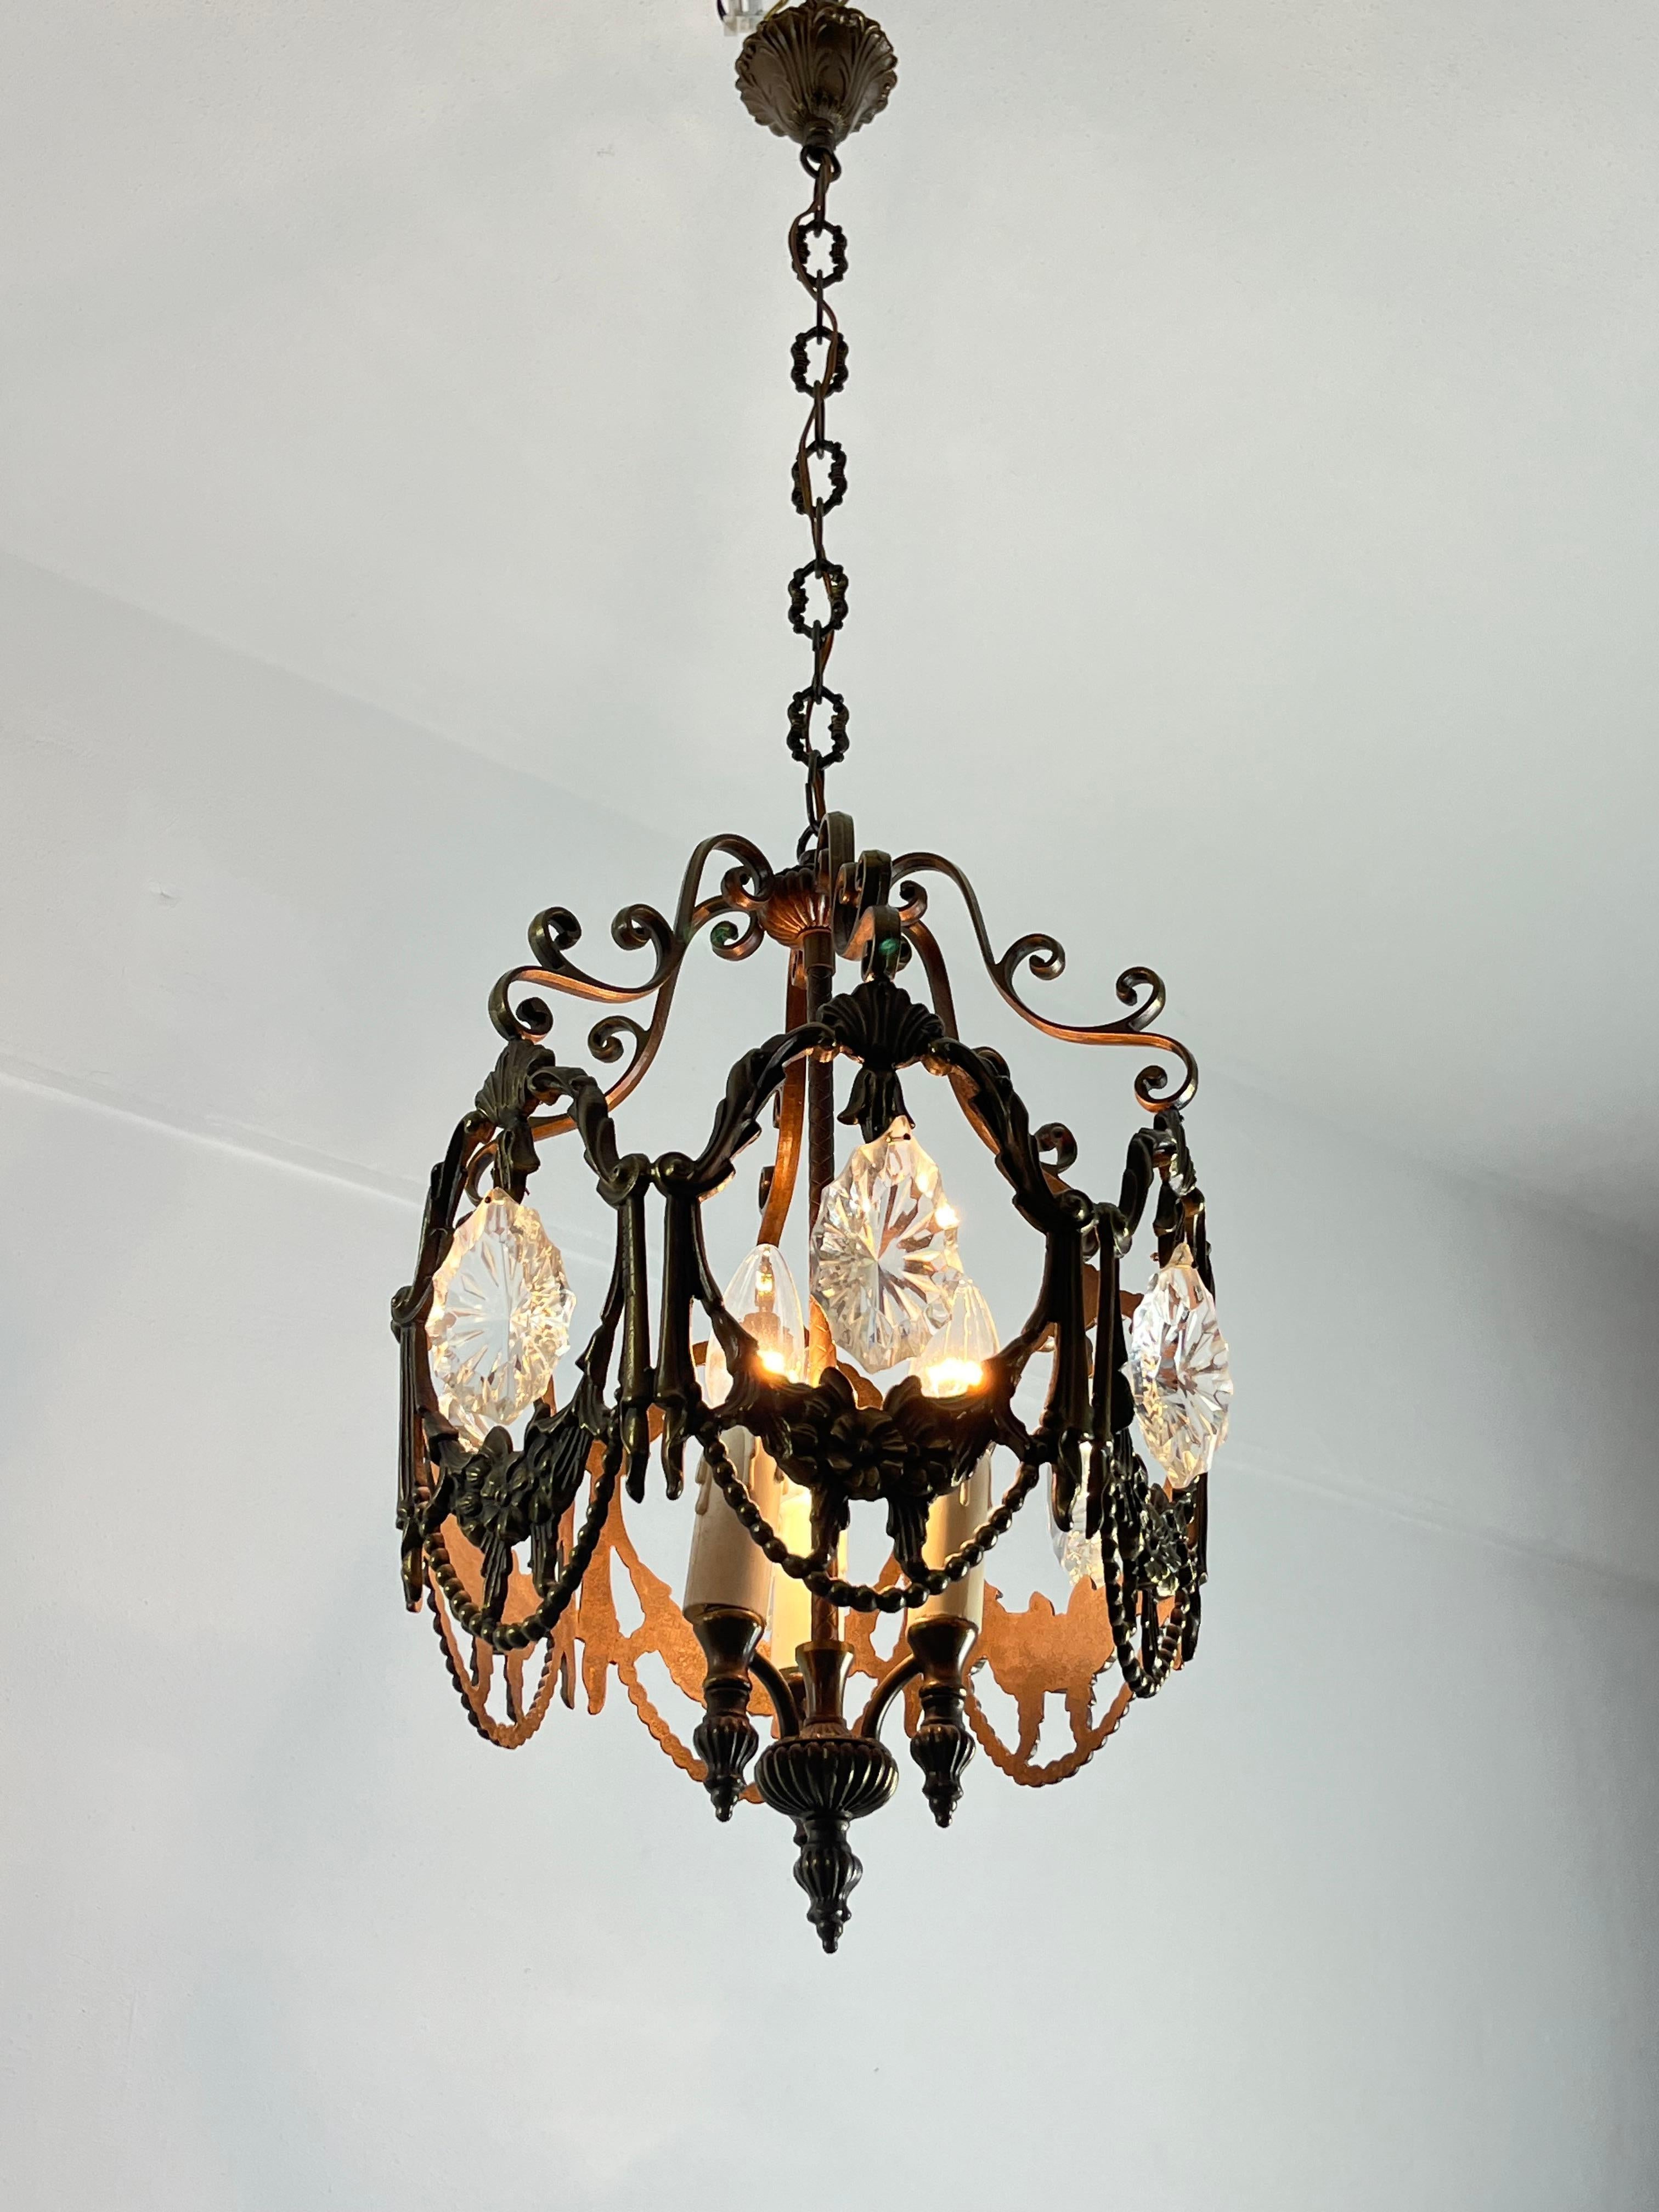 Mid-Century bronze and crystal chandelier attributed to Maison Baguès France 1940s
Good condition, E27 lamp, small signs of aging.

We guarantee adequate packaging and will ship via DHL, insuring the contents against any breakage or loss of the